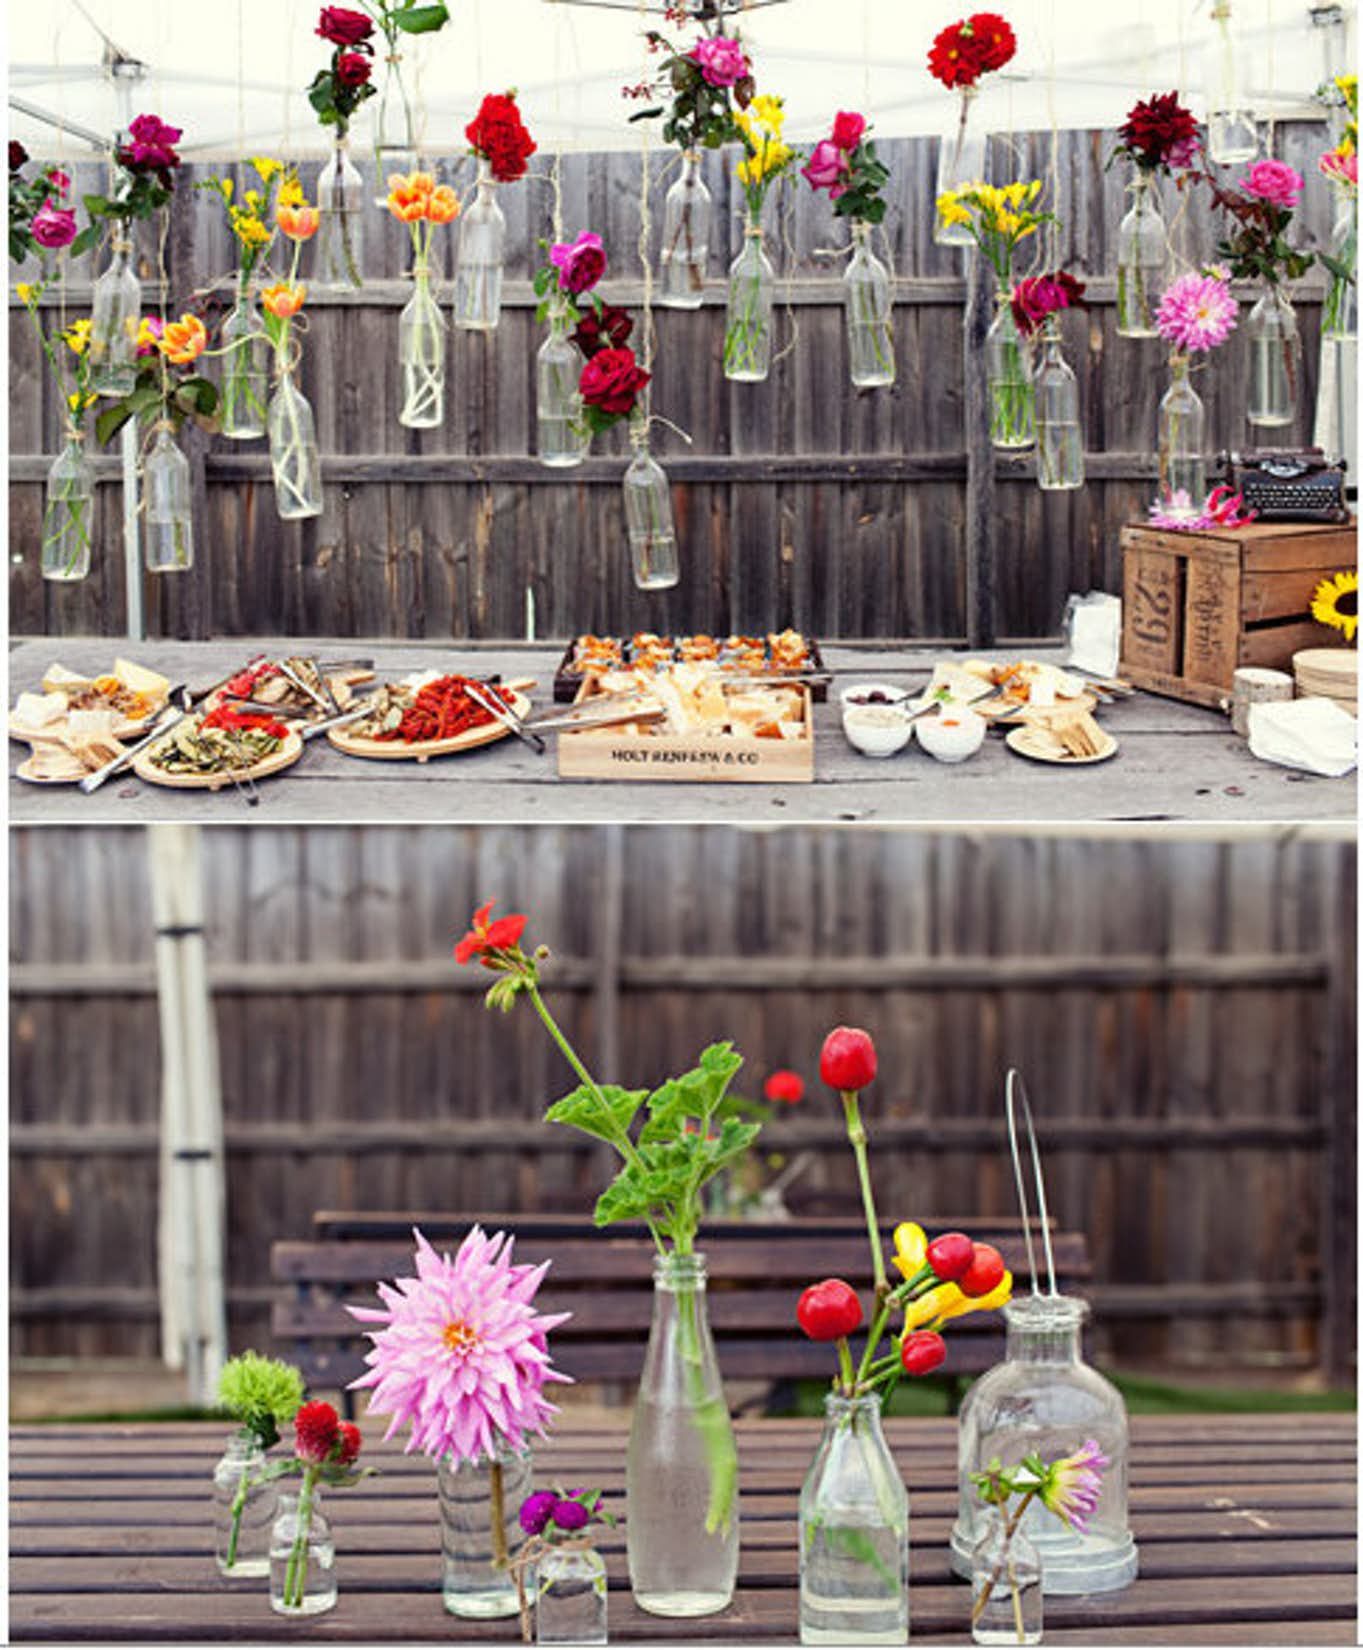 Having a party? Tie vases to the fence and fill them with plants or flowers.